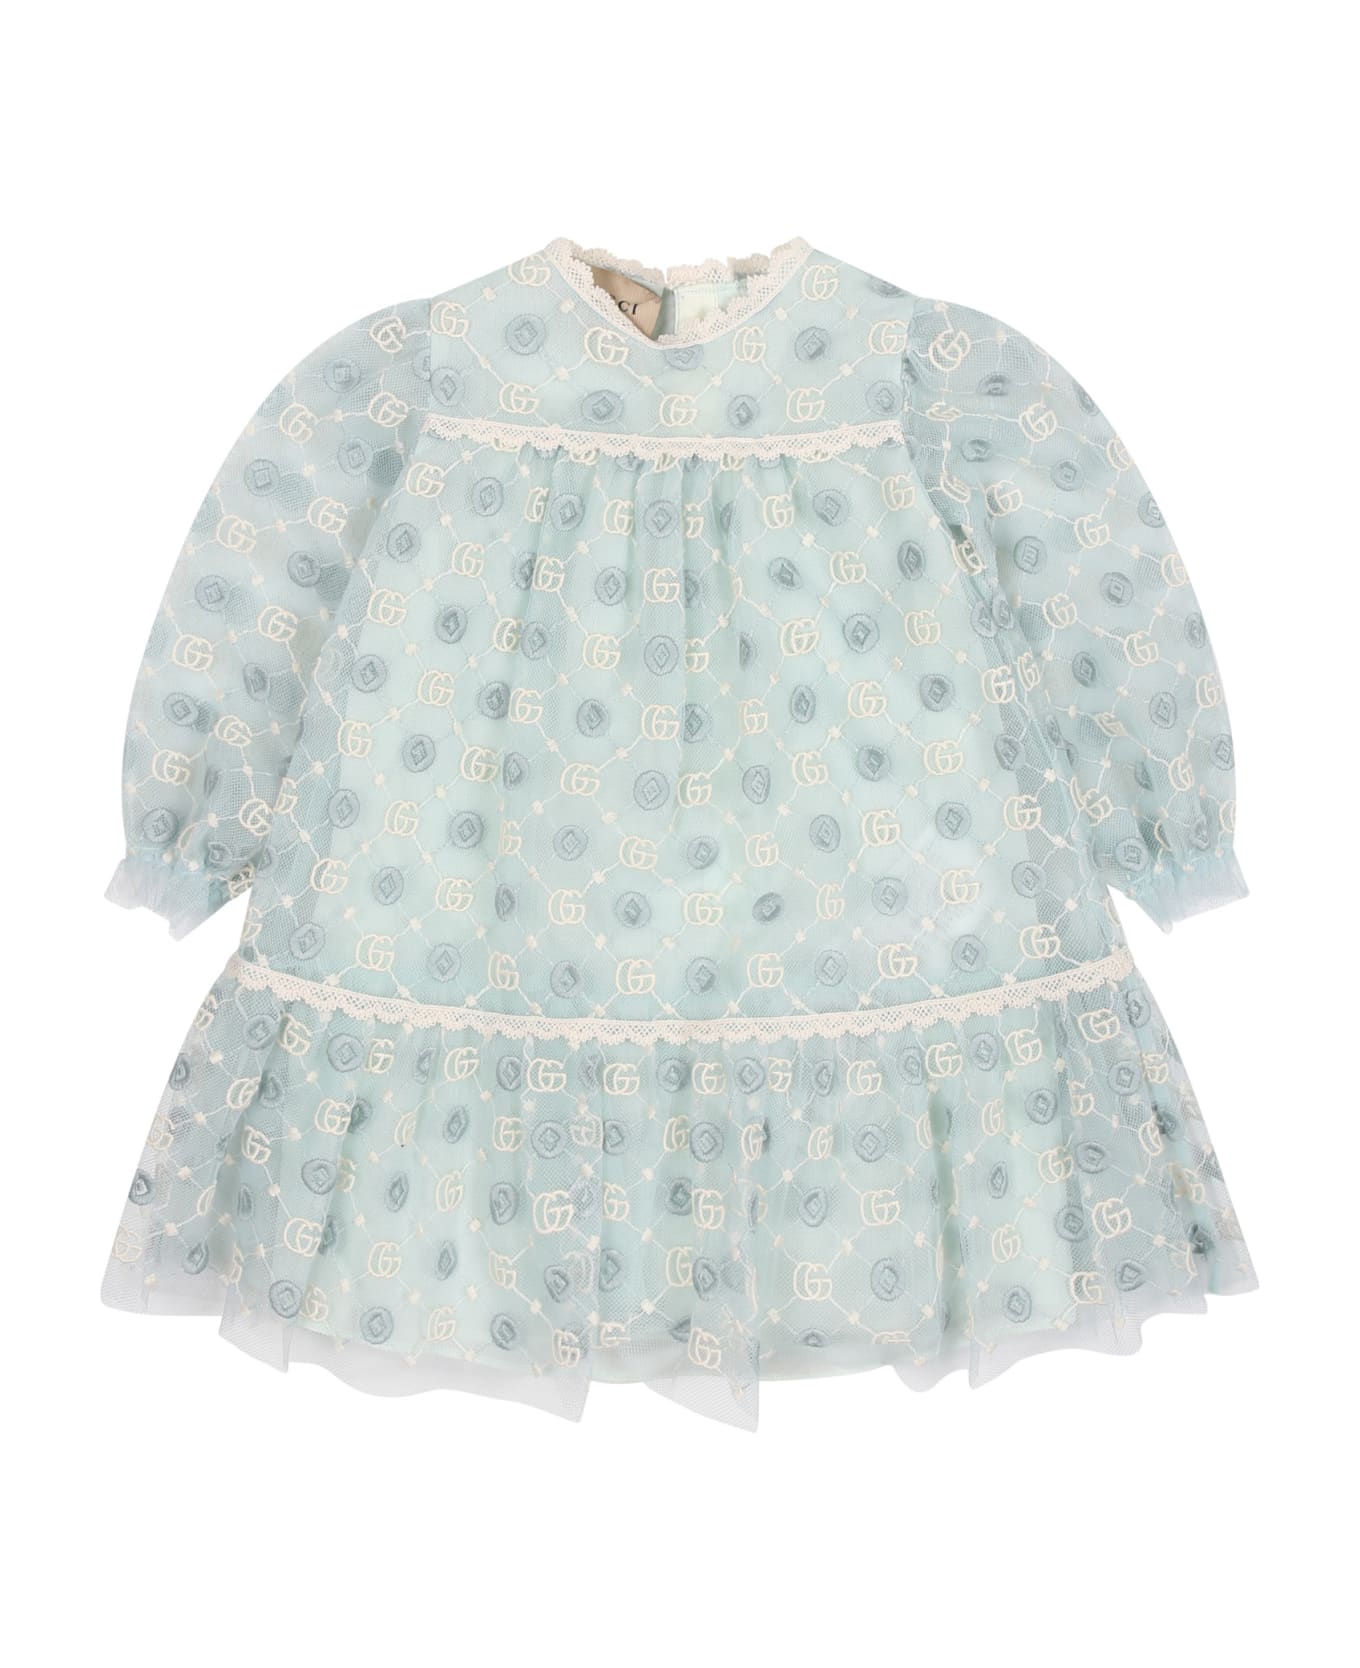 Gucci Light Blue Dress For Baby Girl With Geometric Pattern And Double G - Light Blue